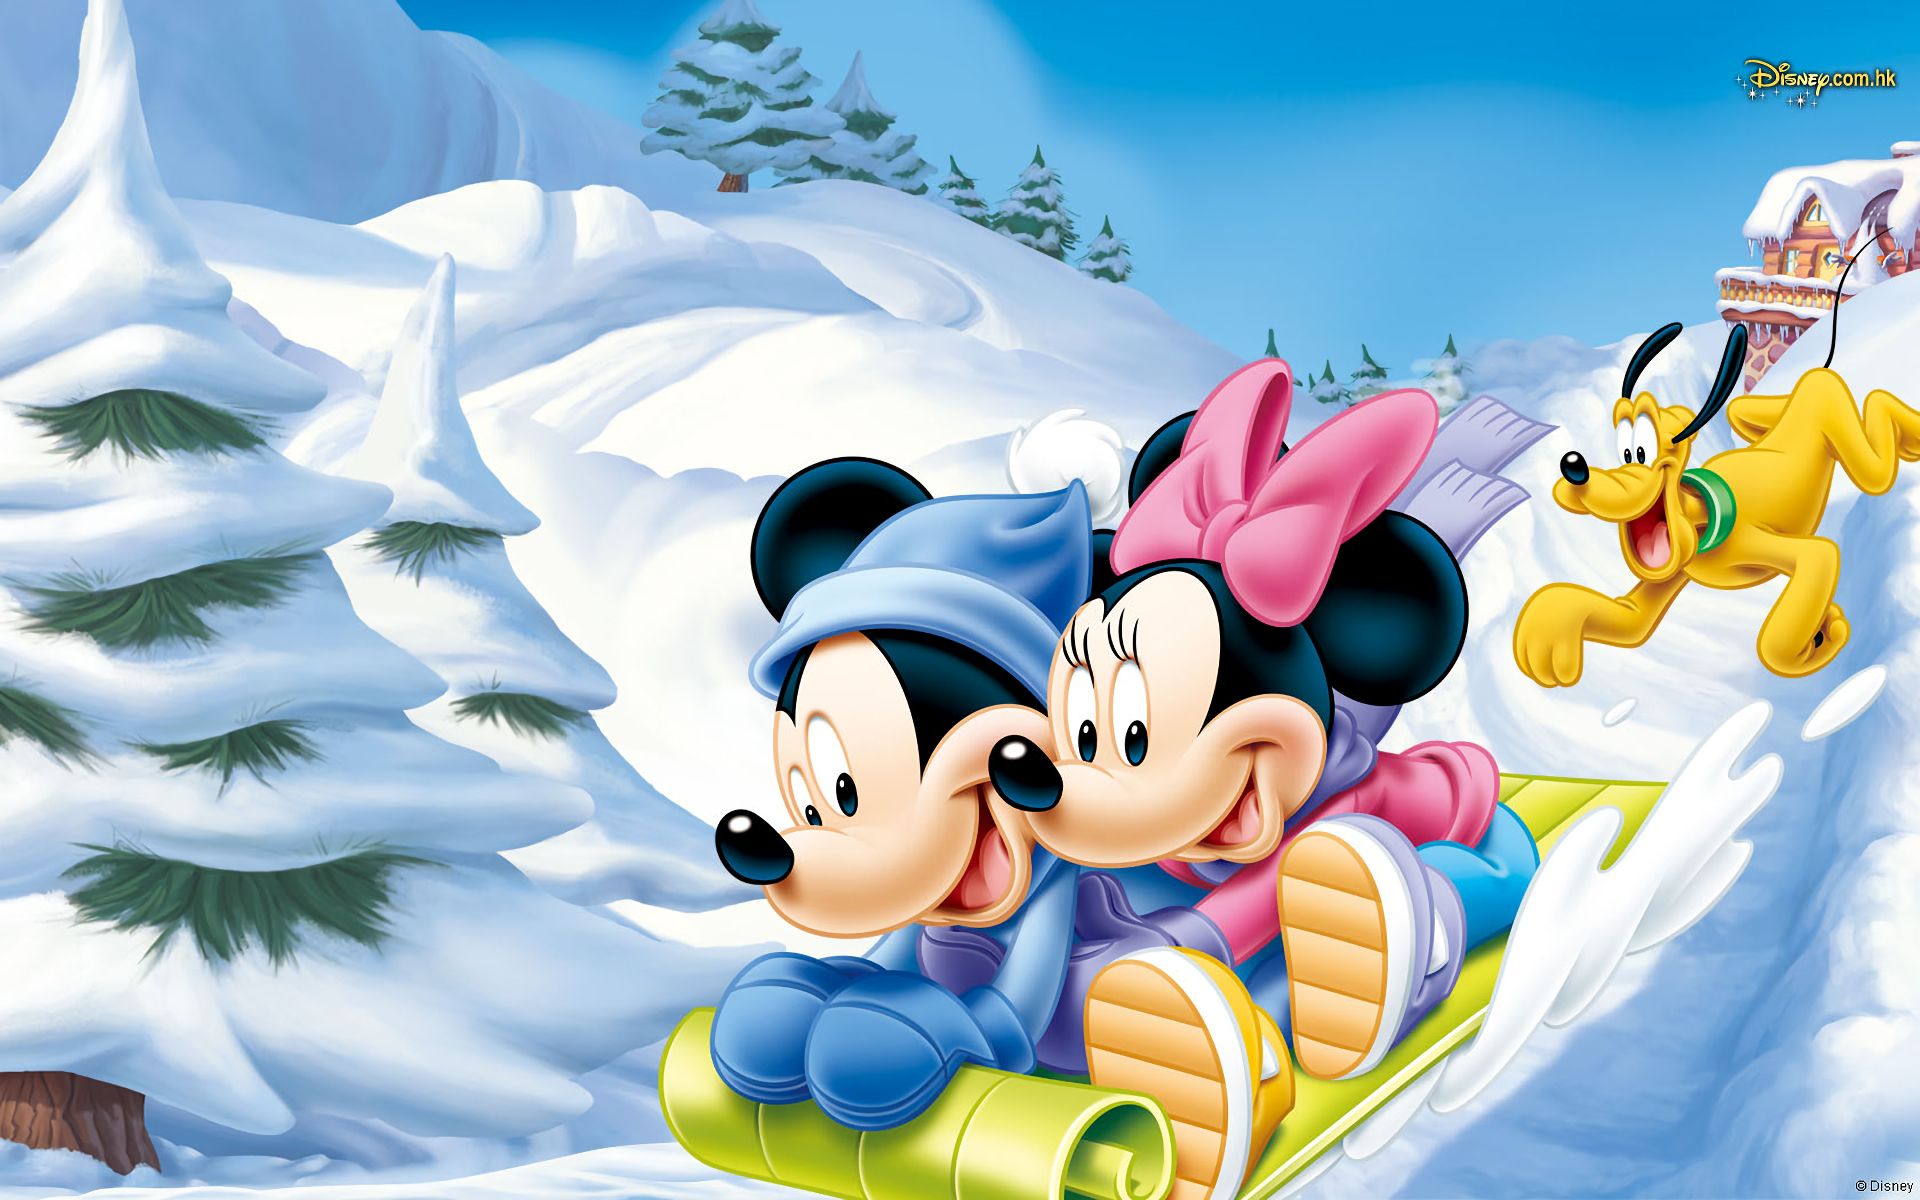 disney, mickey mouse, movie, minnie mouse, pluto, snow HD for desktop 1080p